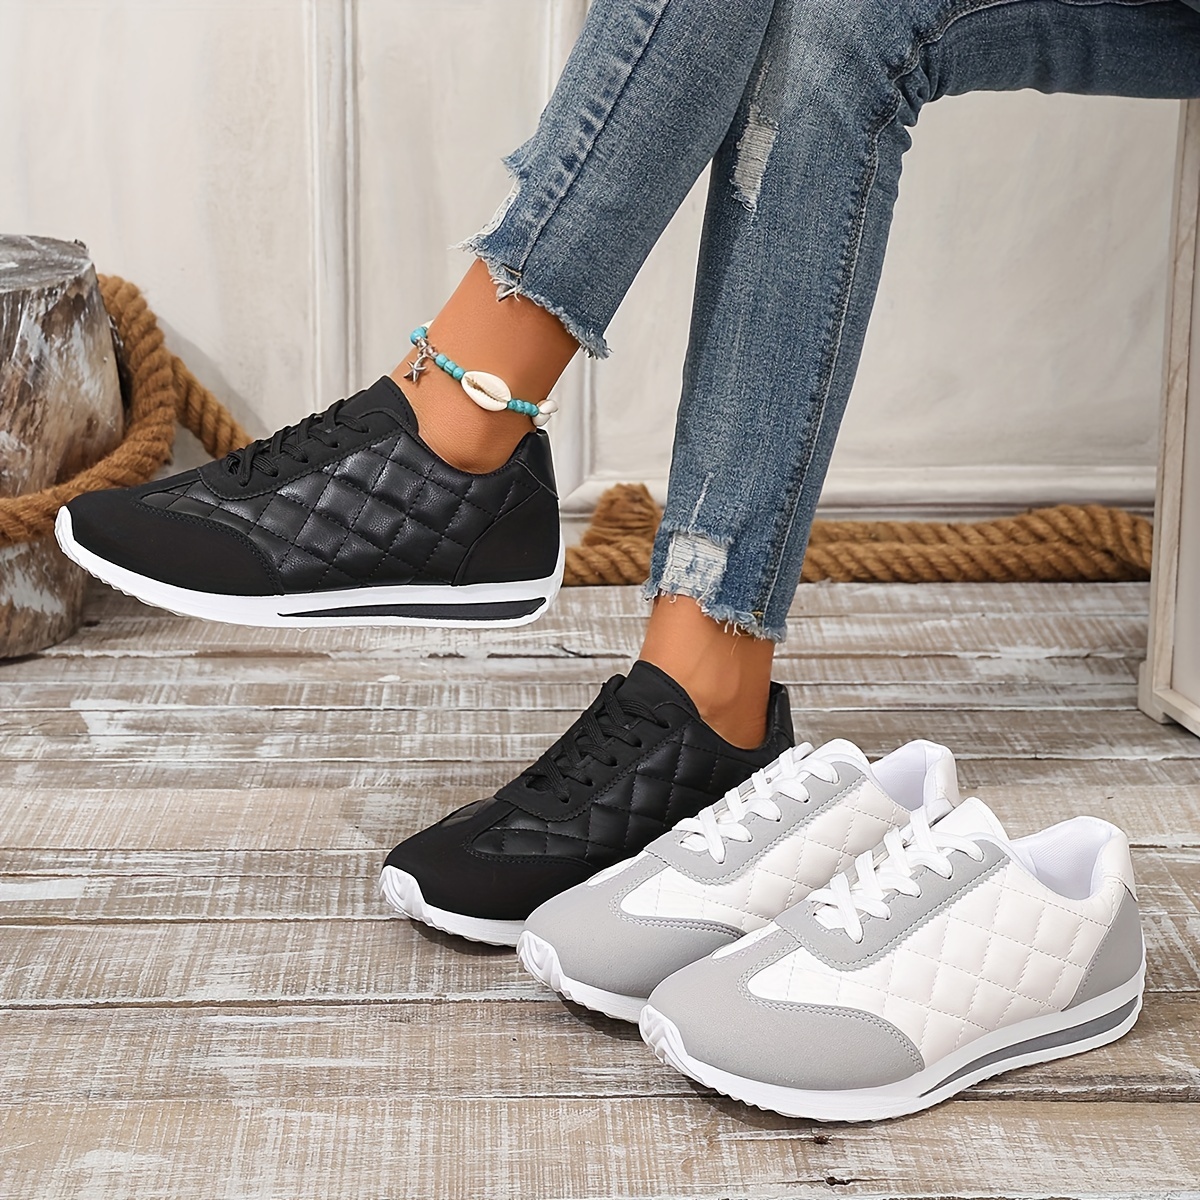 

Women's Solid Color Casual Sneakers, Lace Up Platform Soft Sole Walking Shoes, Quilted Pattern Walking Trainers